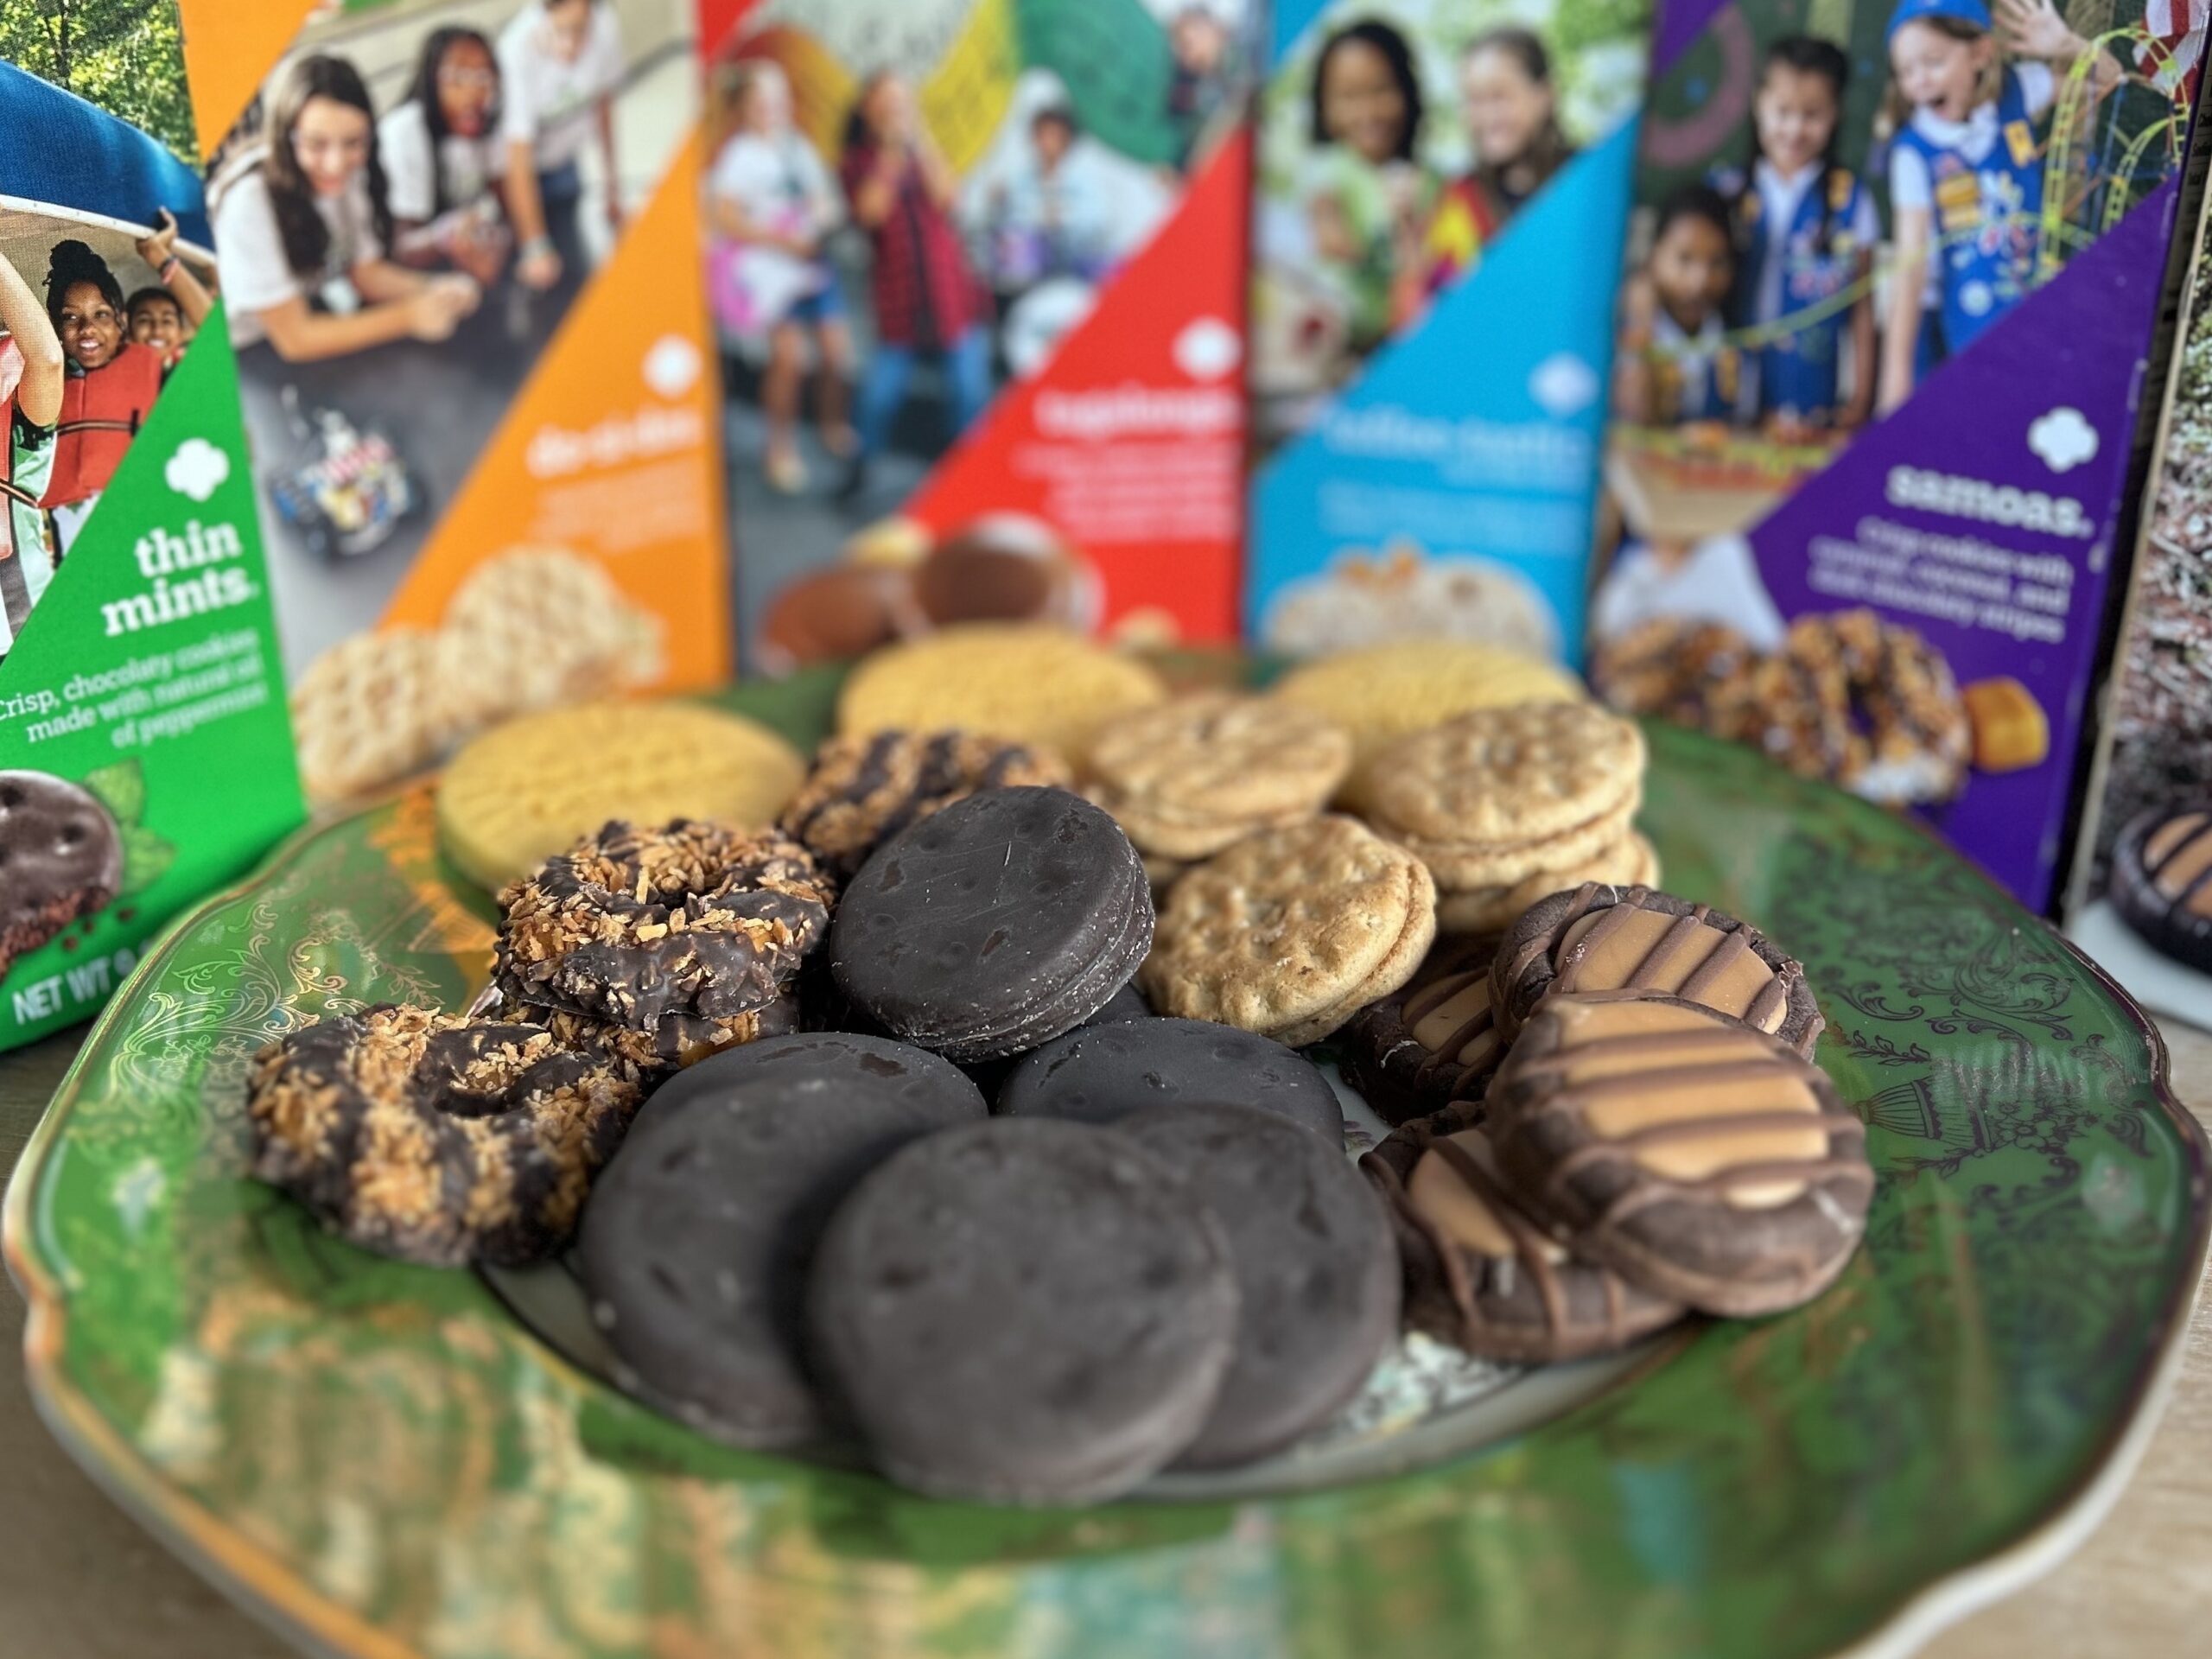 My daughters sold Girl Scout Cookies. Here’s what I learned in the Thin Mint trenches